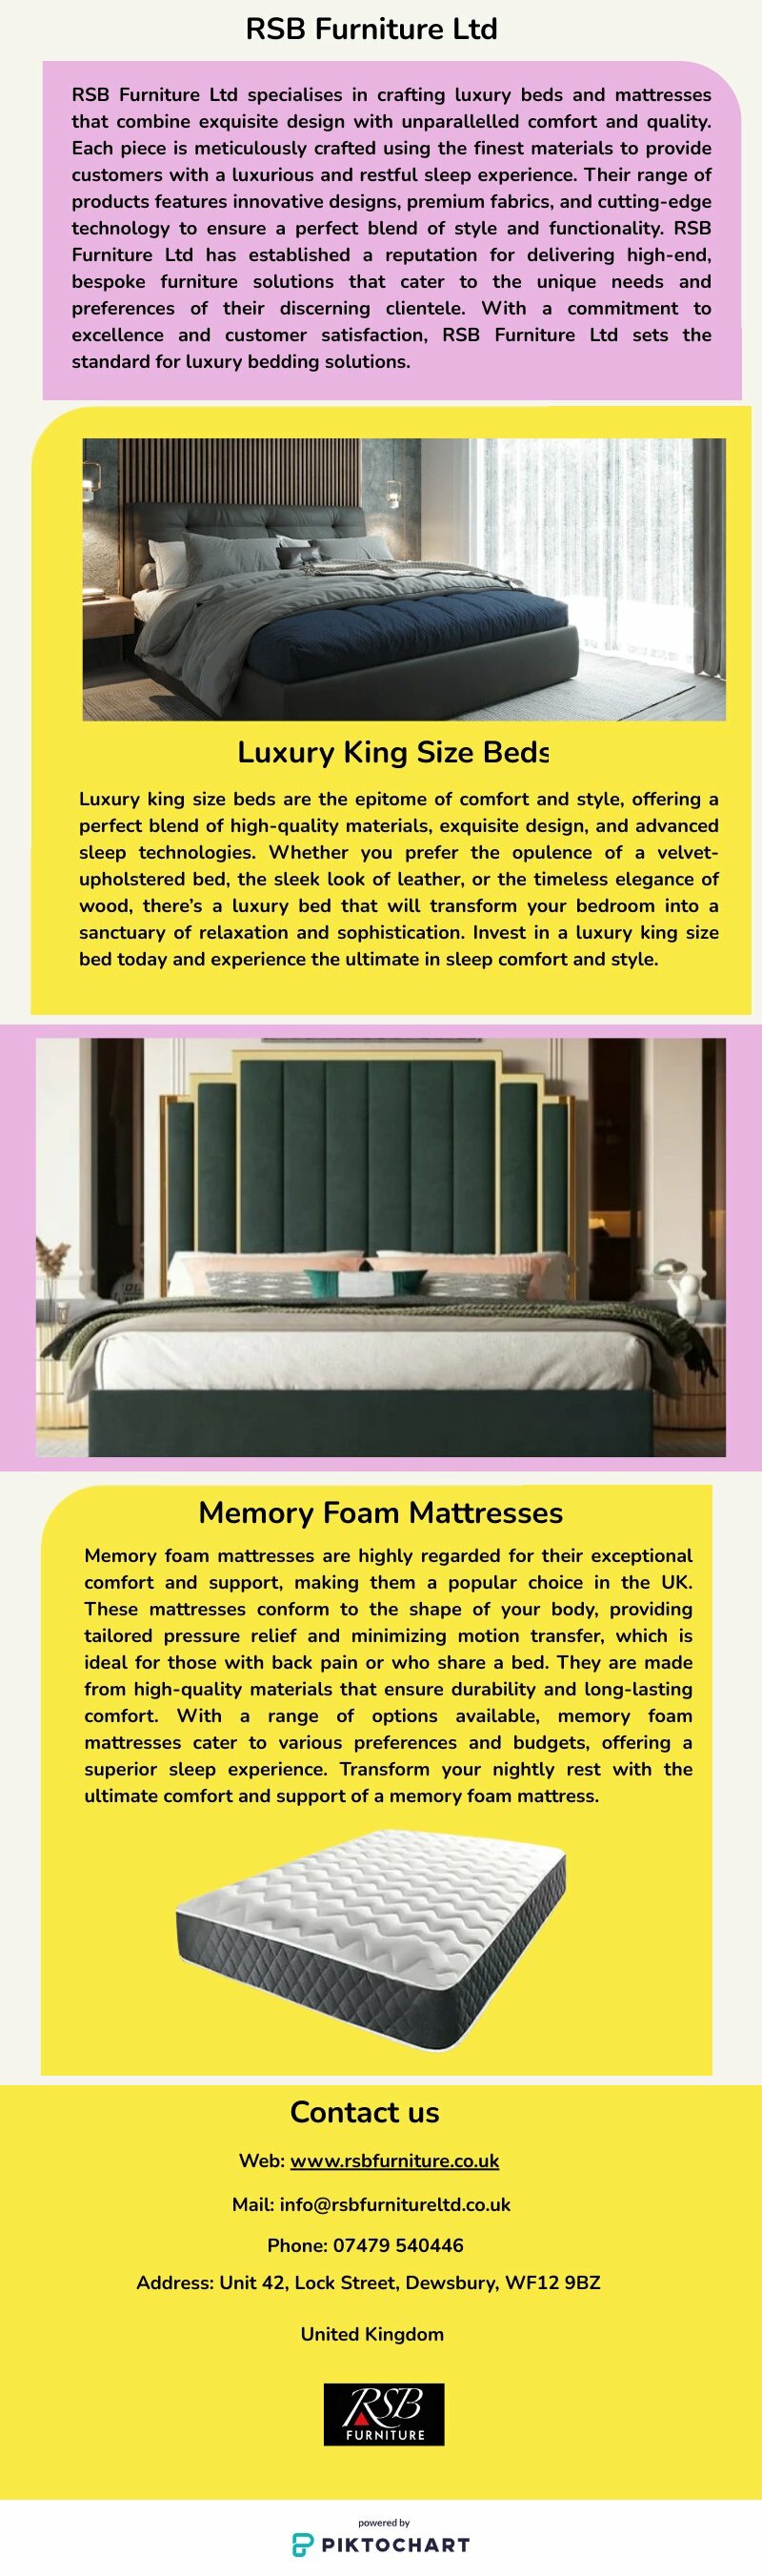 Luxury King Size Beds That Redefine Comfort and Style | Piktochart Visual Editor